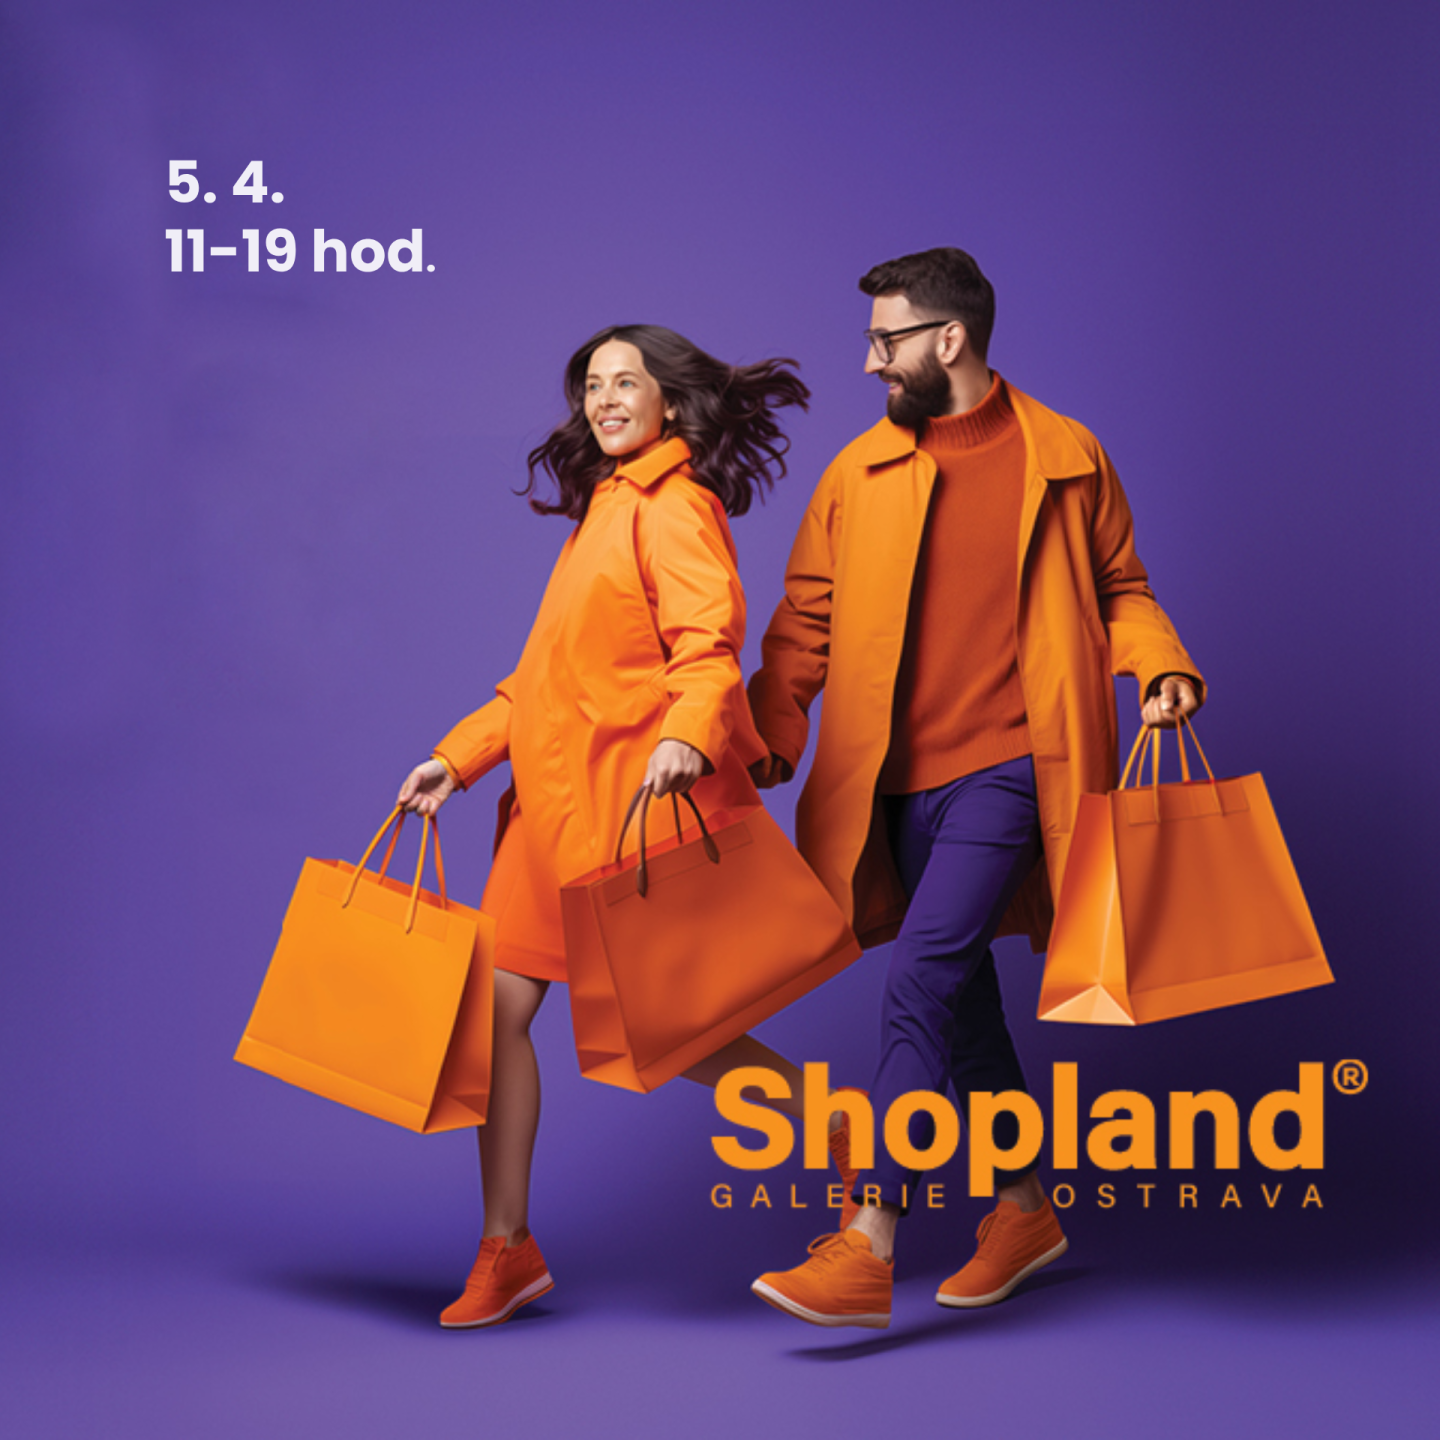 SHOPLAND IS HERE! 
Already on April 5 with gifts for you!